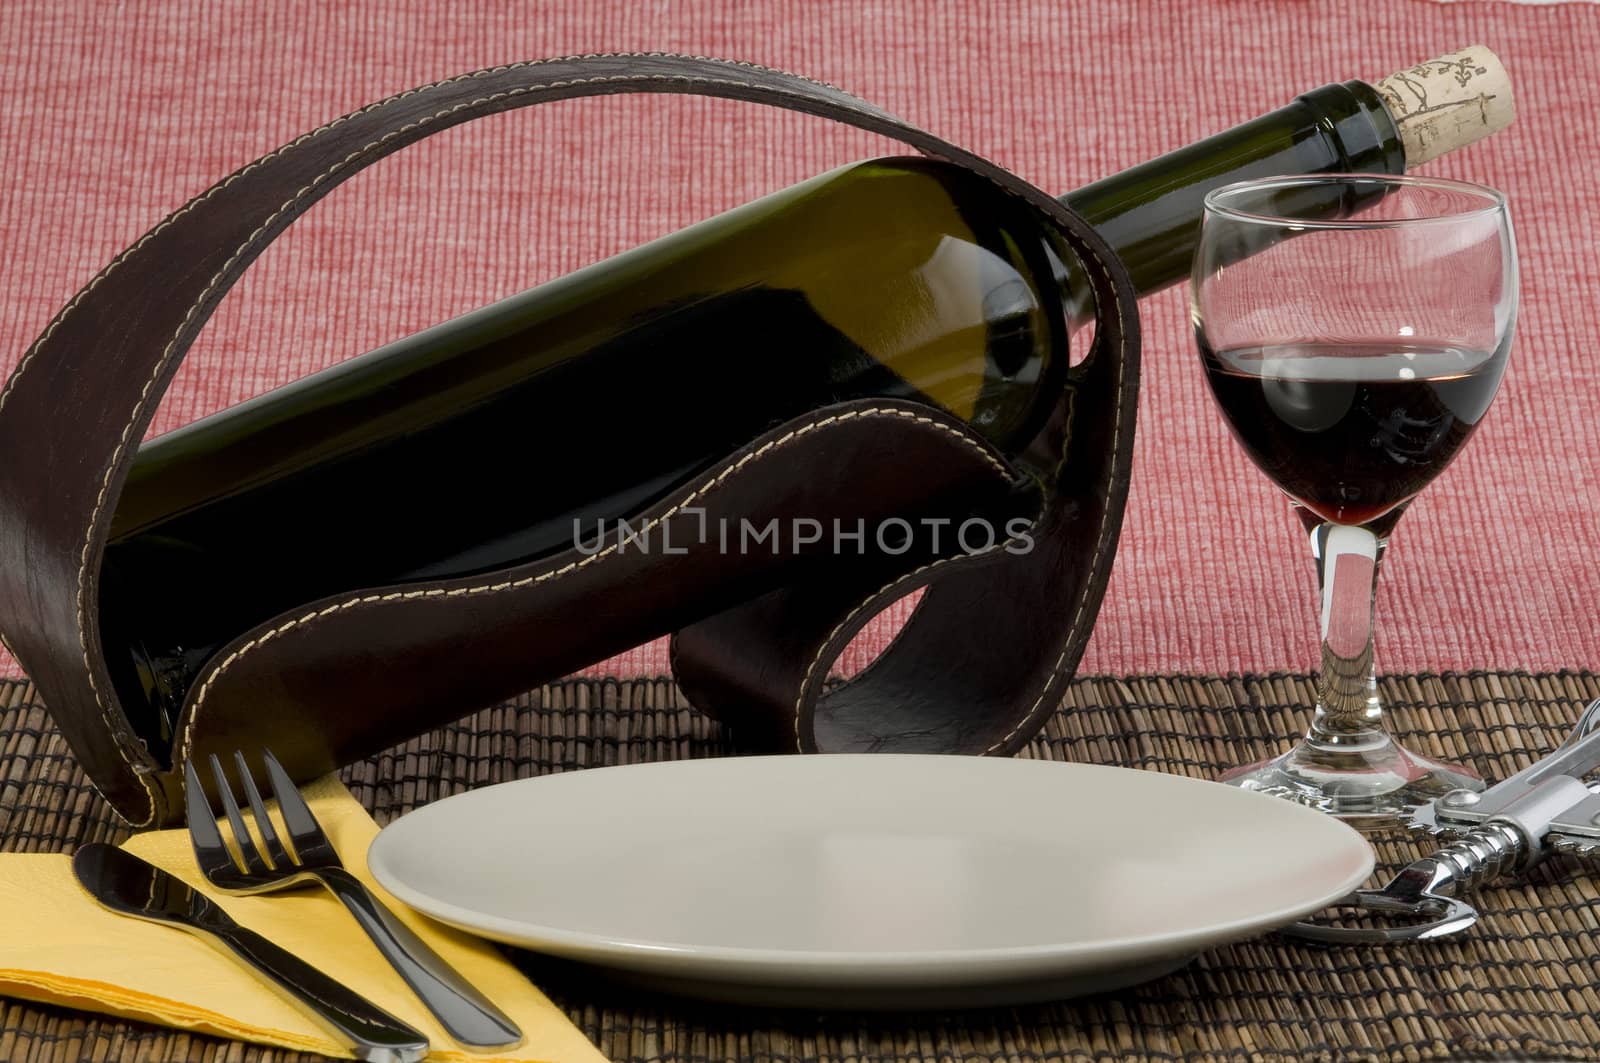 Bottle of wine, glass and plate by celaler